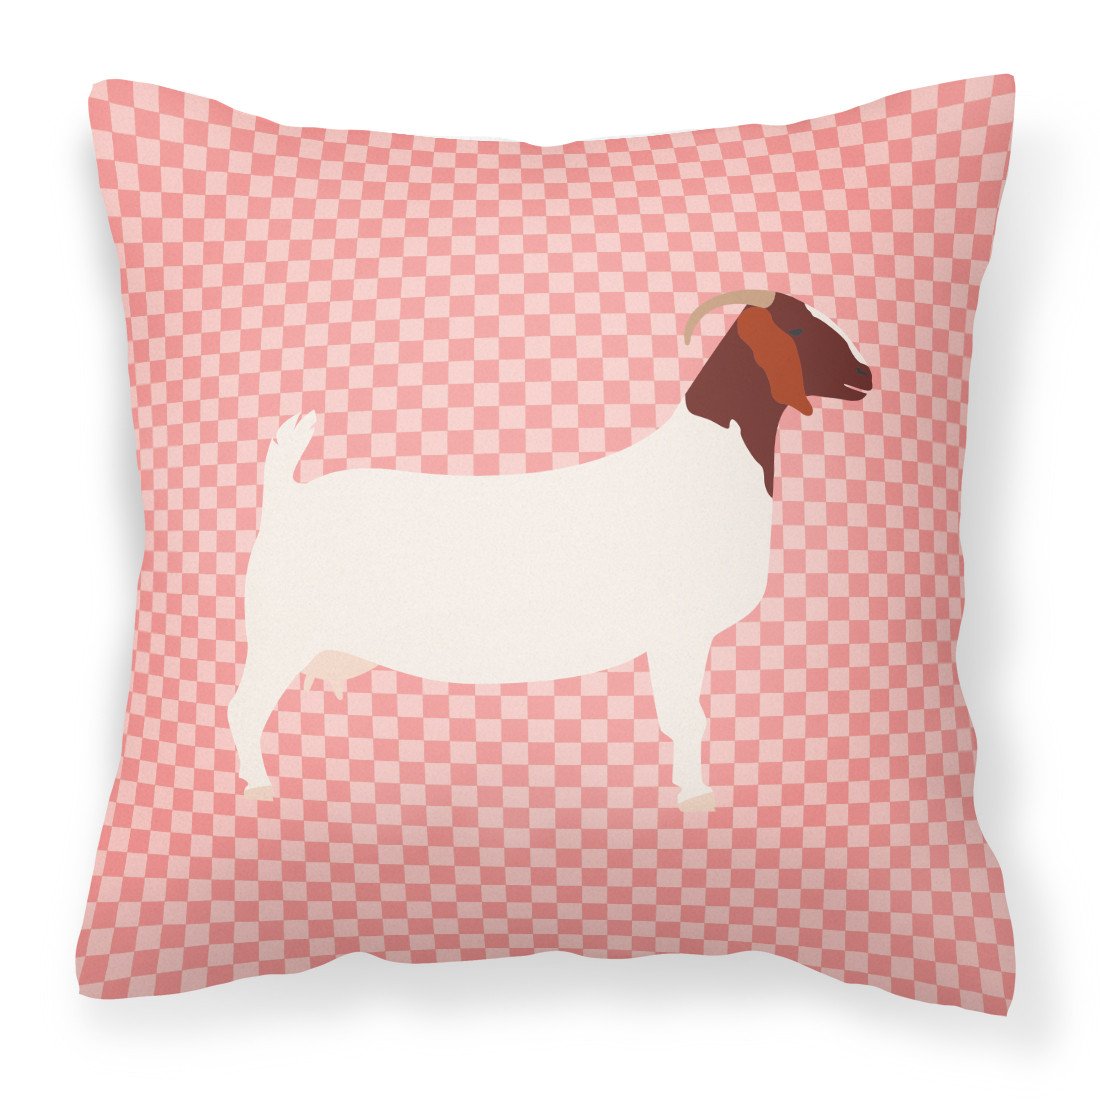 Boer Goat Pink Check Fabric Decorative Pillow BB7886PW1818 by Caroline's Treasures